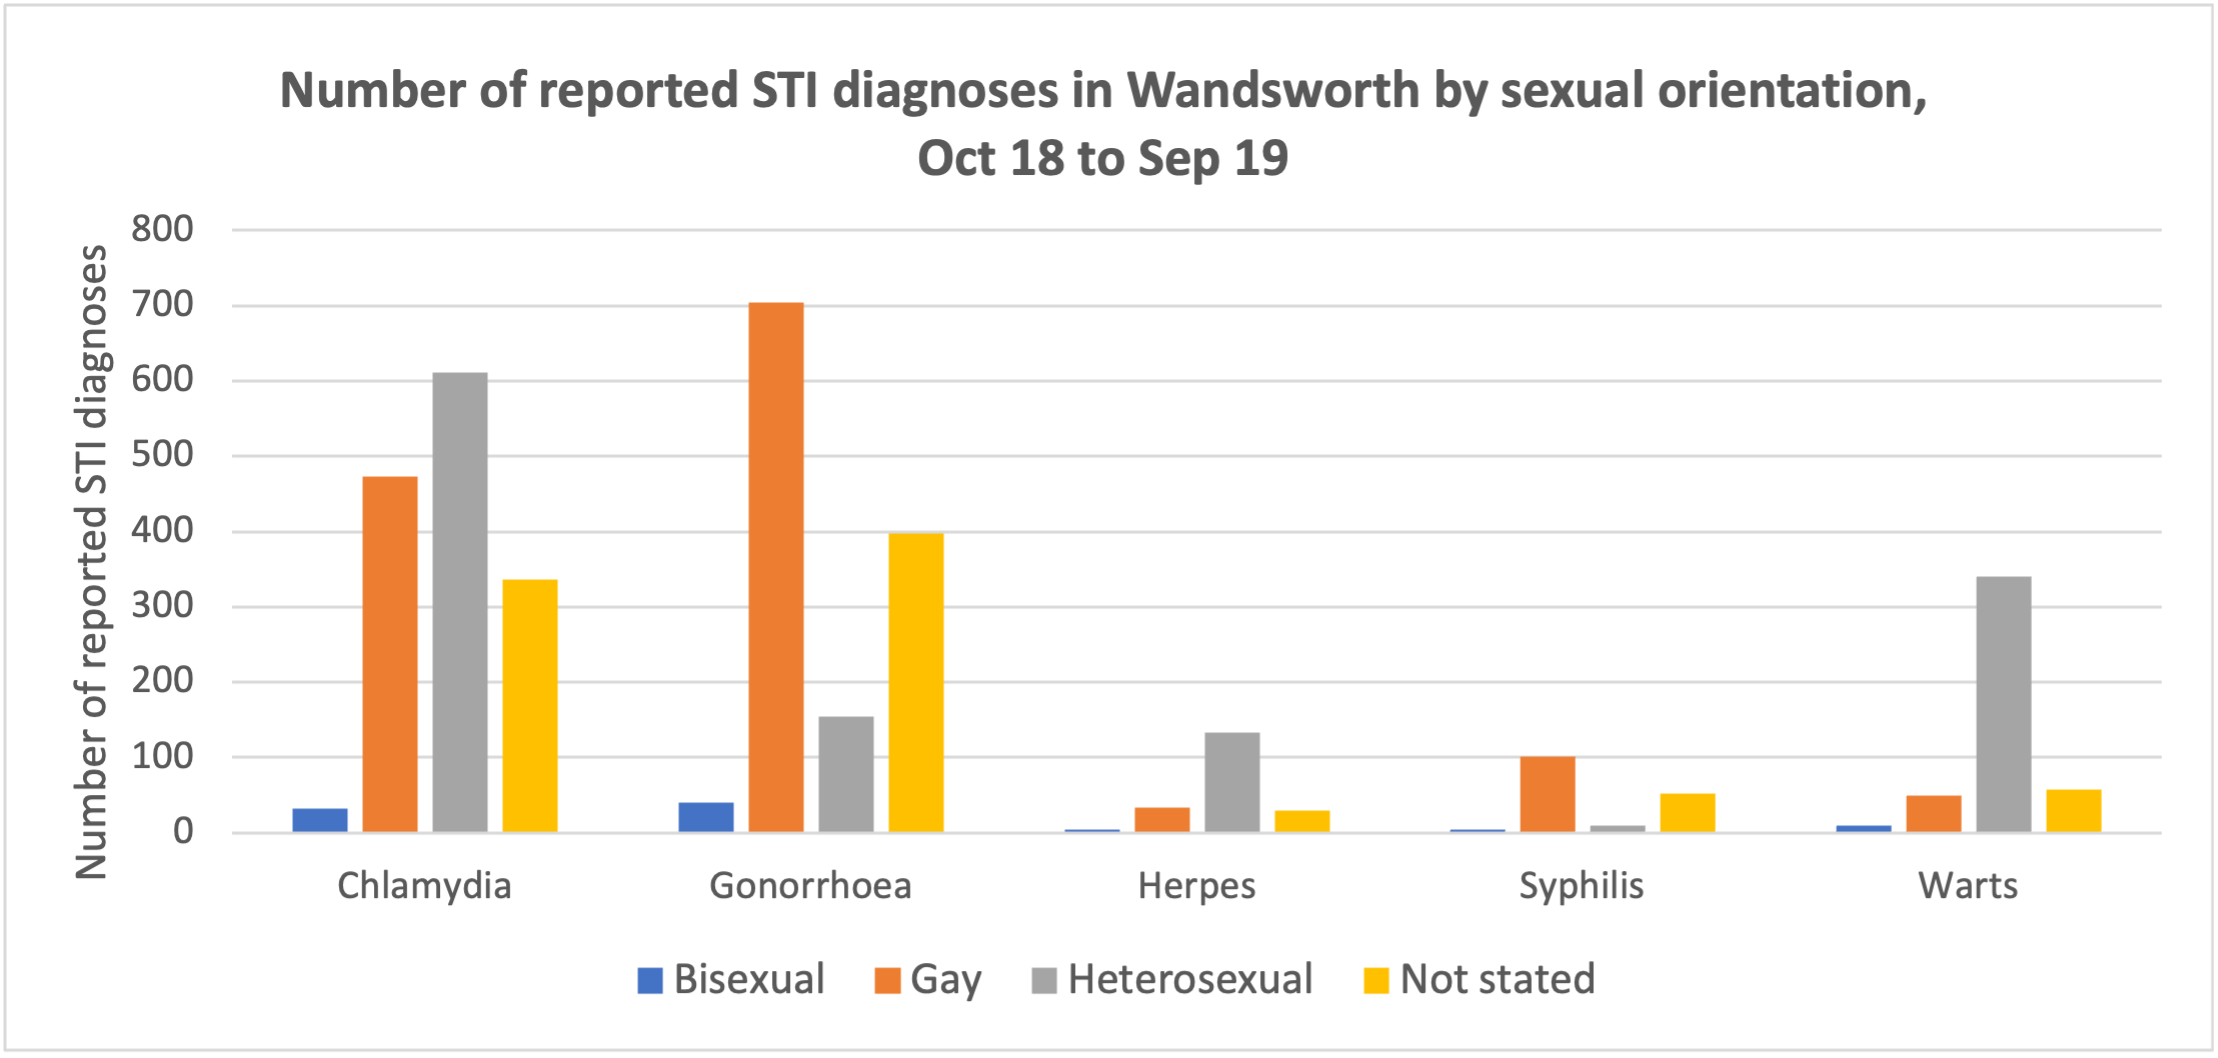 Reported STI diagnoses in Wandsworth by sexual orientation, Oct 18 to Sep 19